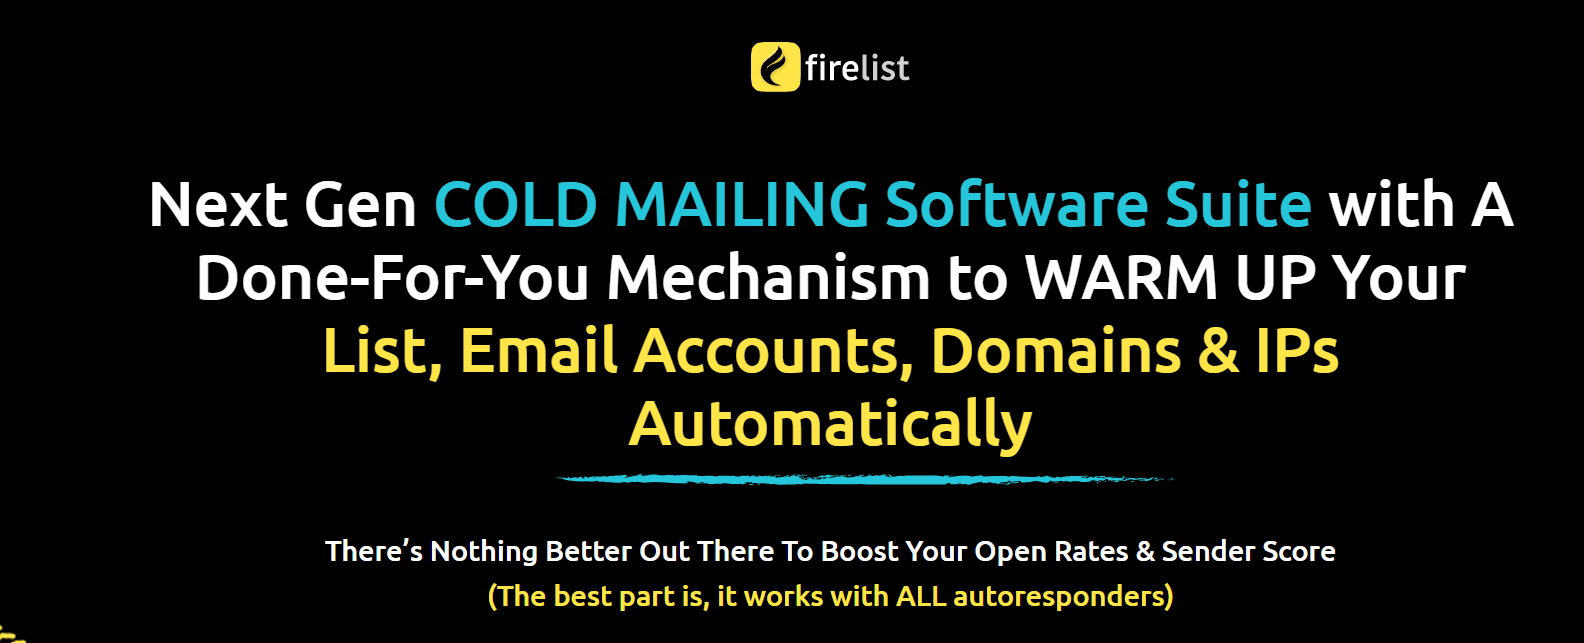 FireList is a next-generation cold email platform with a done-for-you automated engine to warm up your email list, your email accounts, domains and IPs - fully automatically!